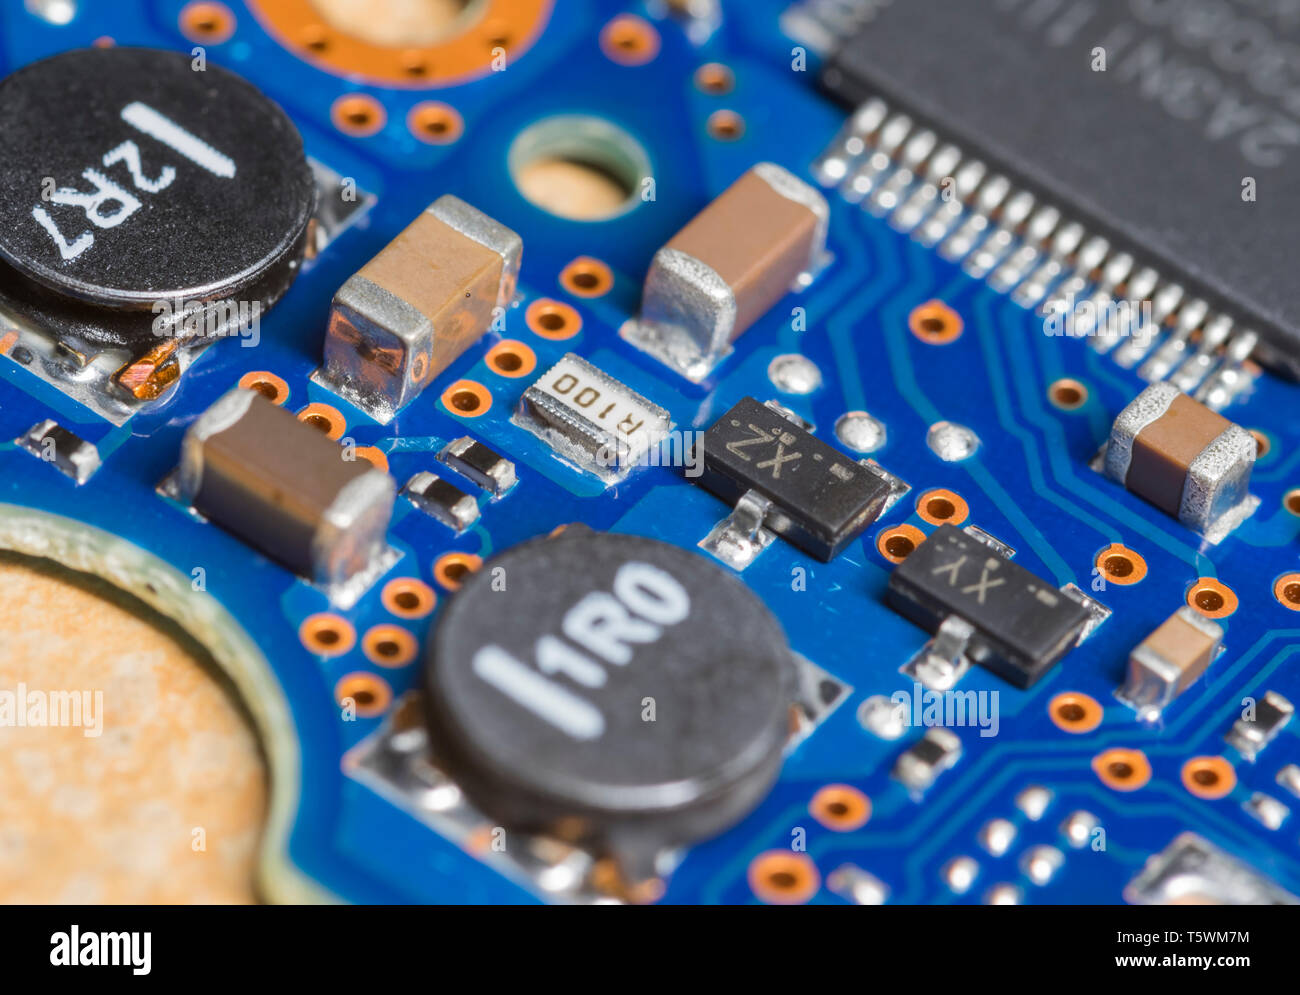 Macro closeup image of various SMT (Surface Mount Technology) components mounted on an electronics PCB (Printed Circuit Board). Stock Photo